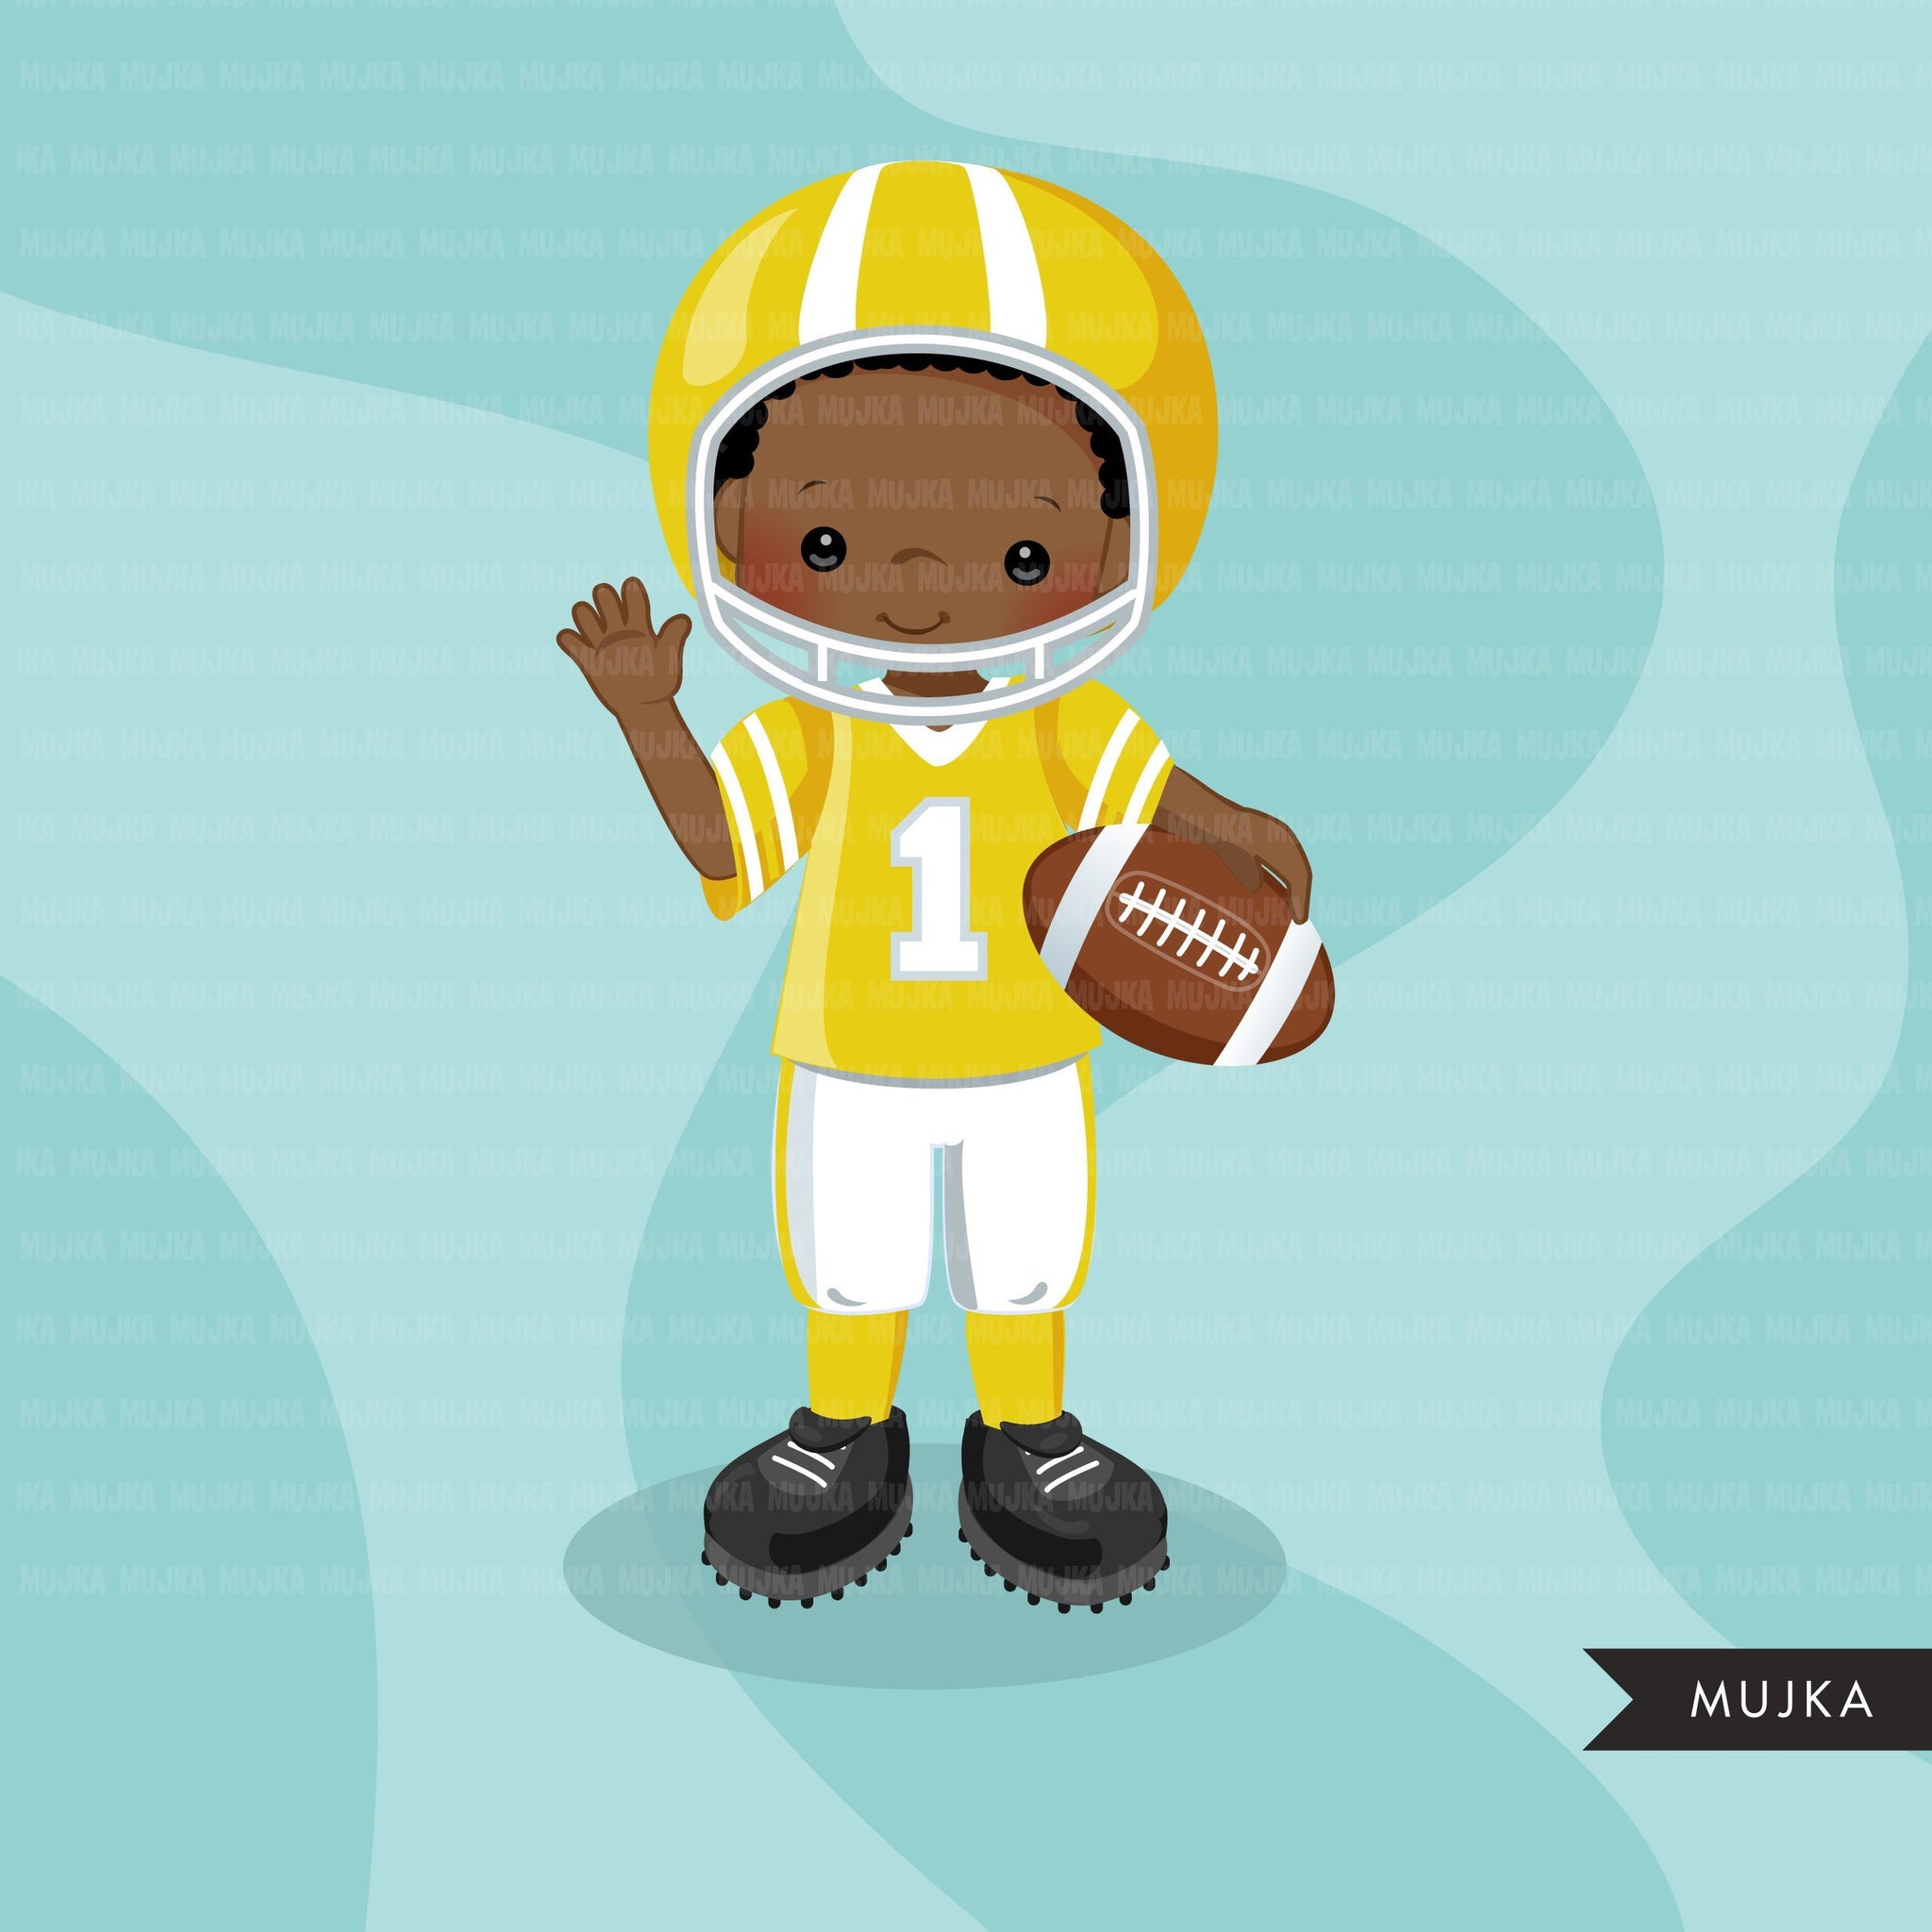 Football clipart, boy in yellow jersey